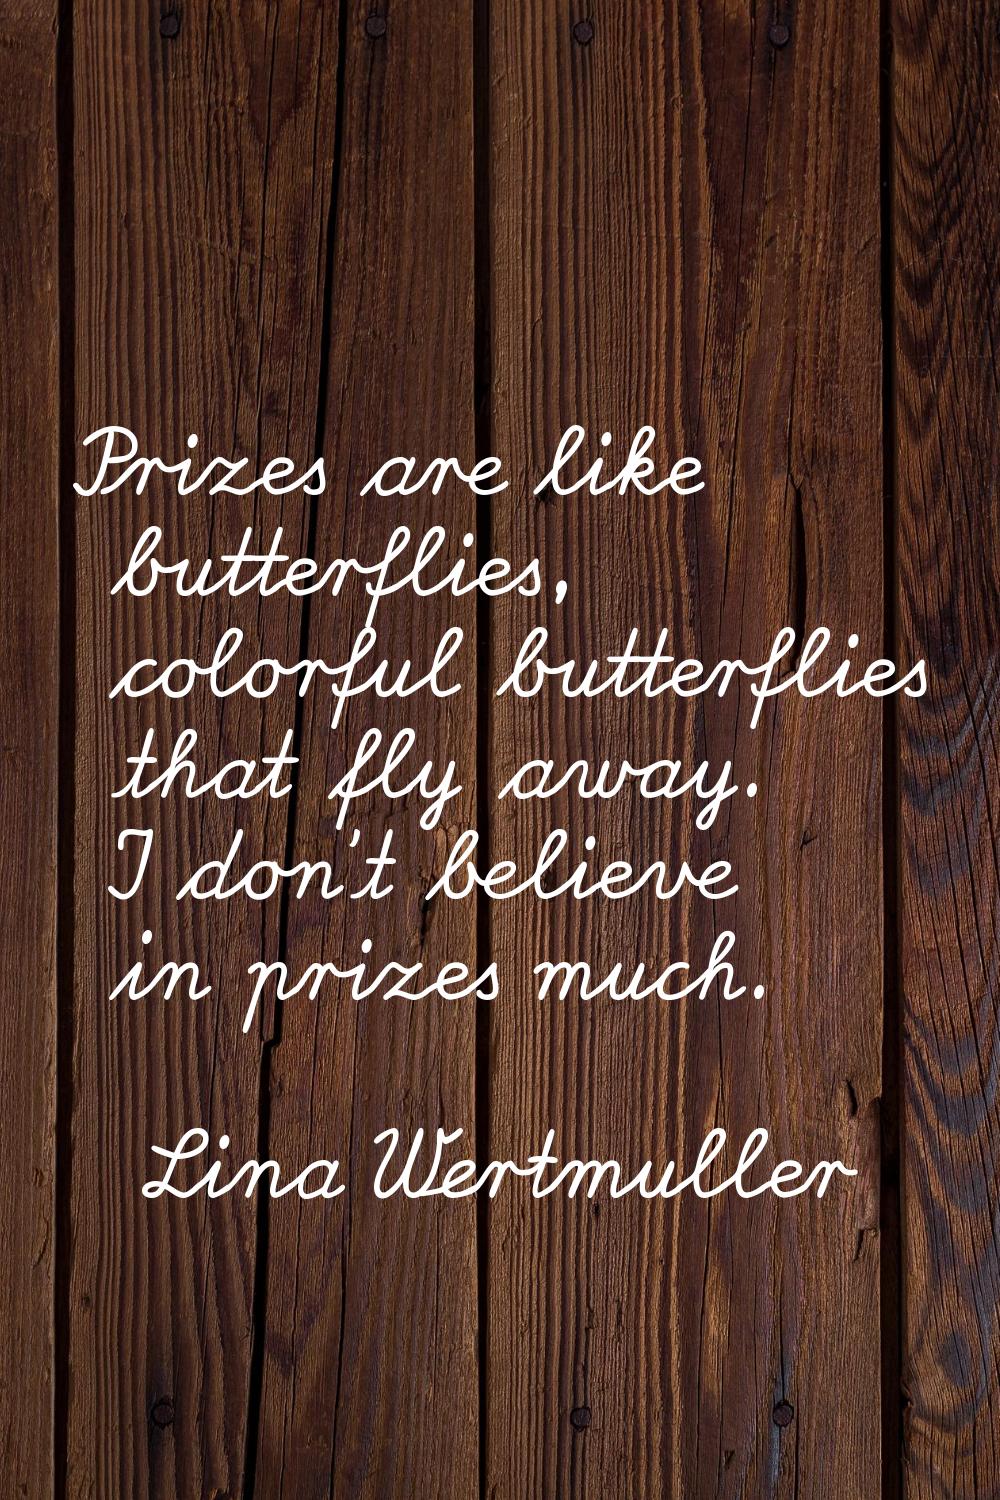 Prizes are like butterflies, colorful butterflies that fly away. I don't believe in prizes much.